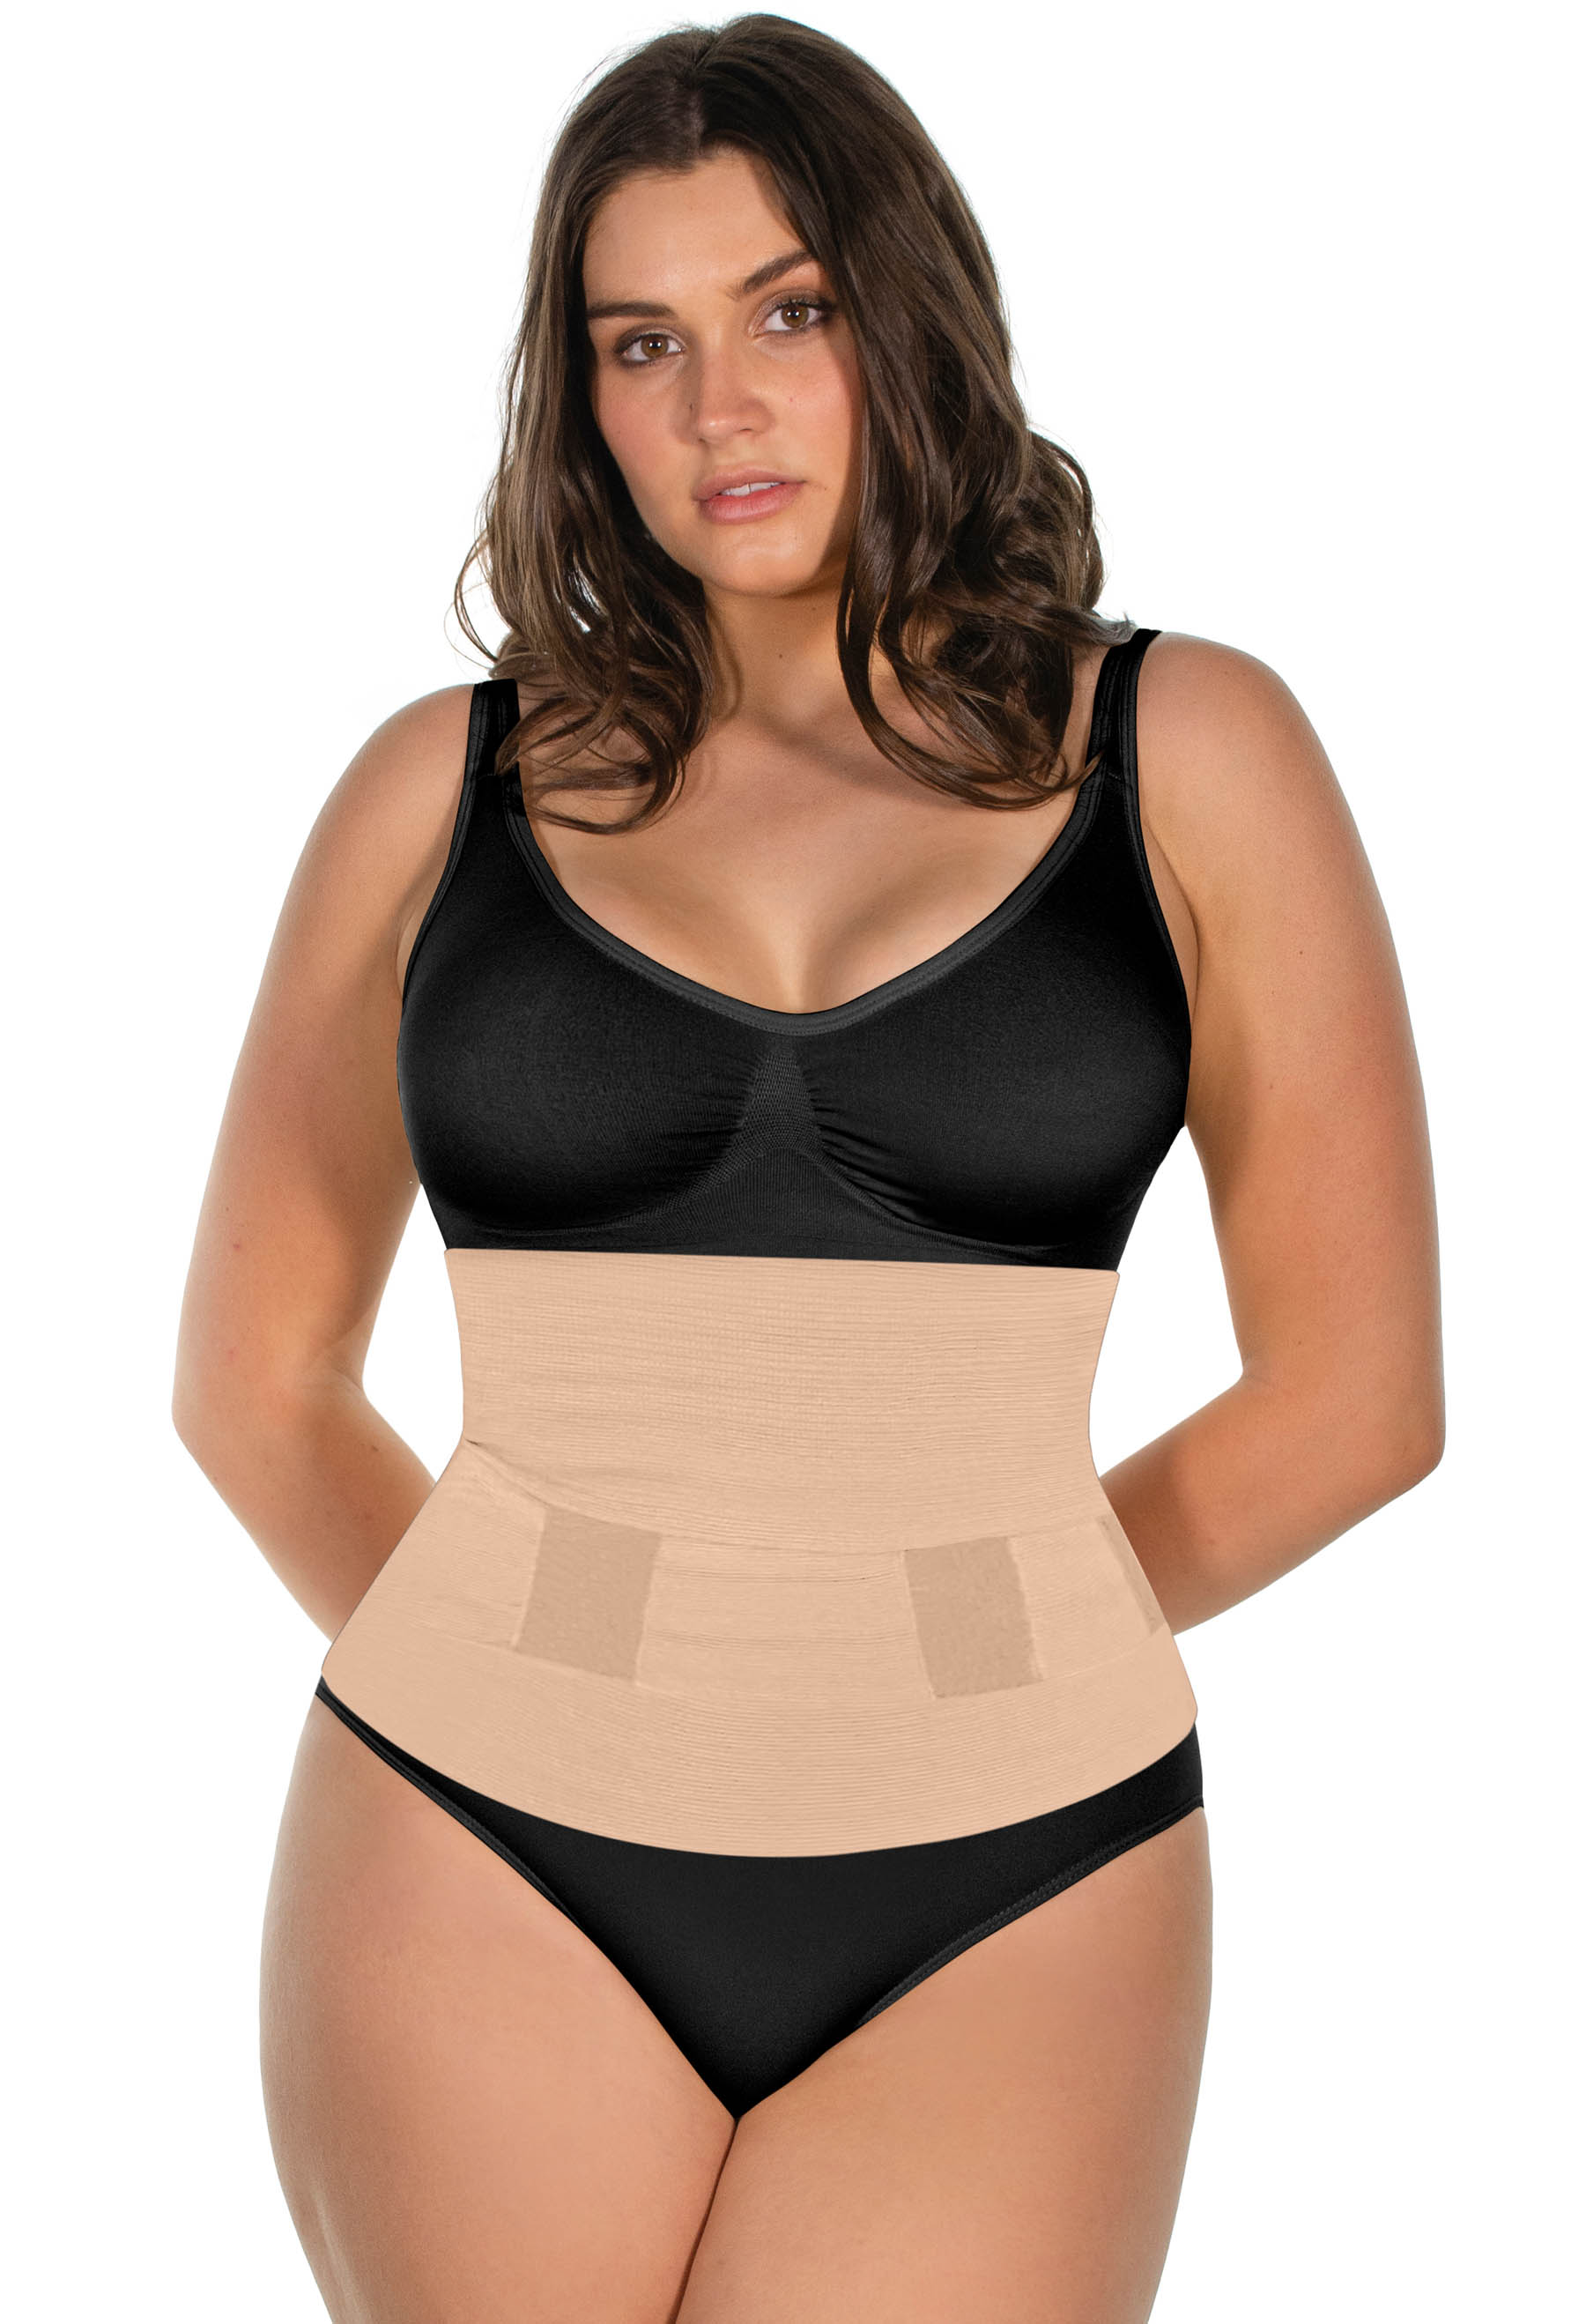 Body Shaping Wrap Band